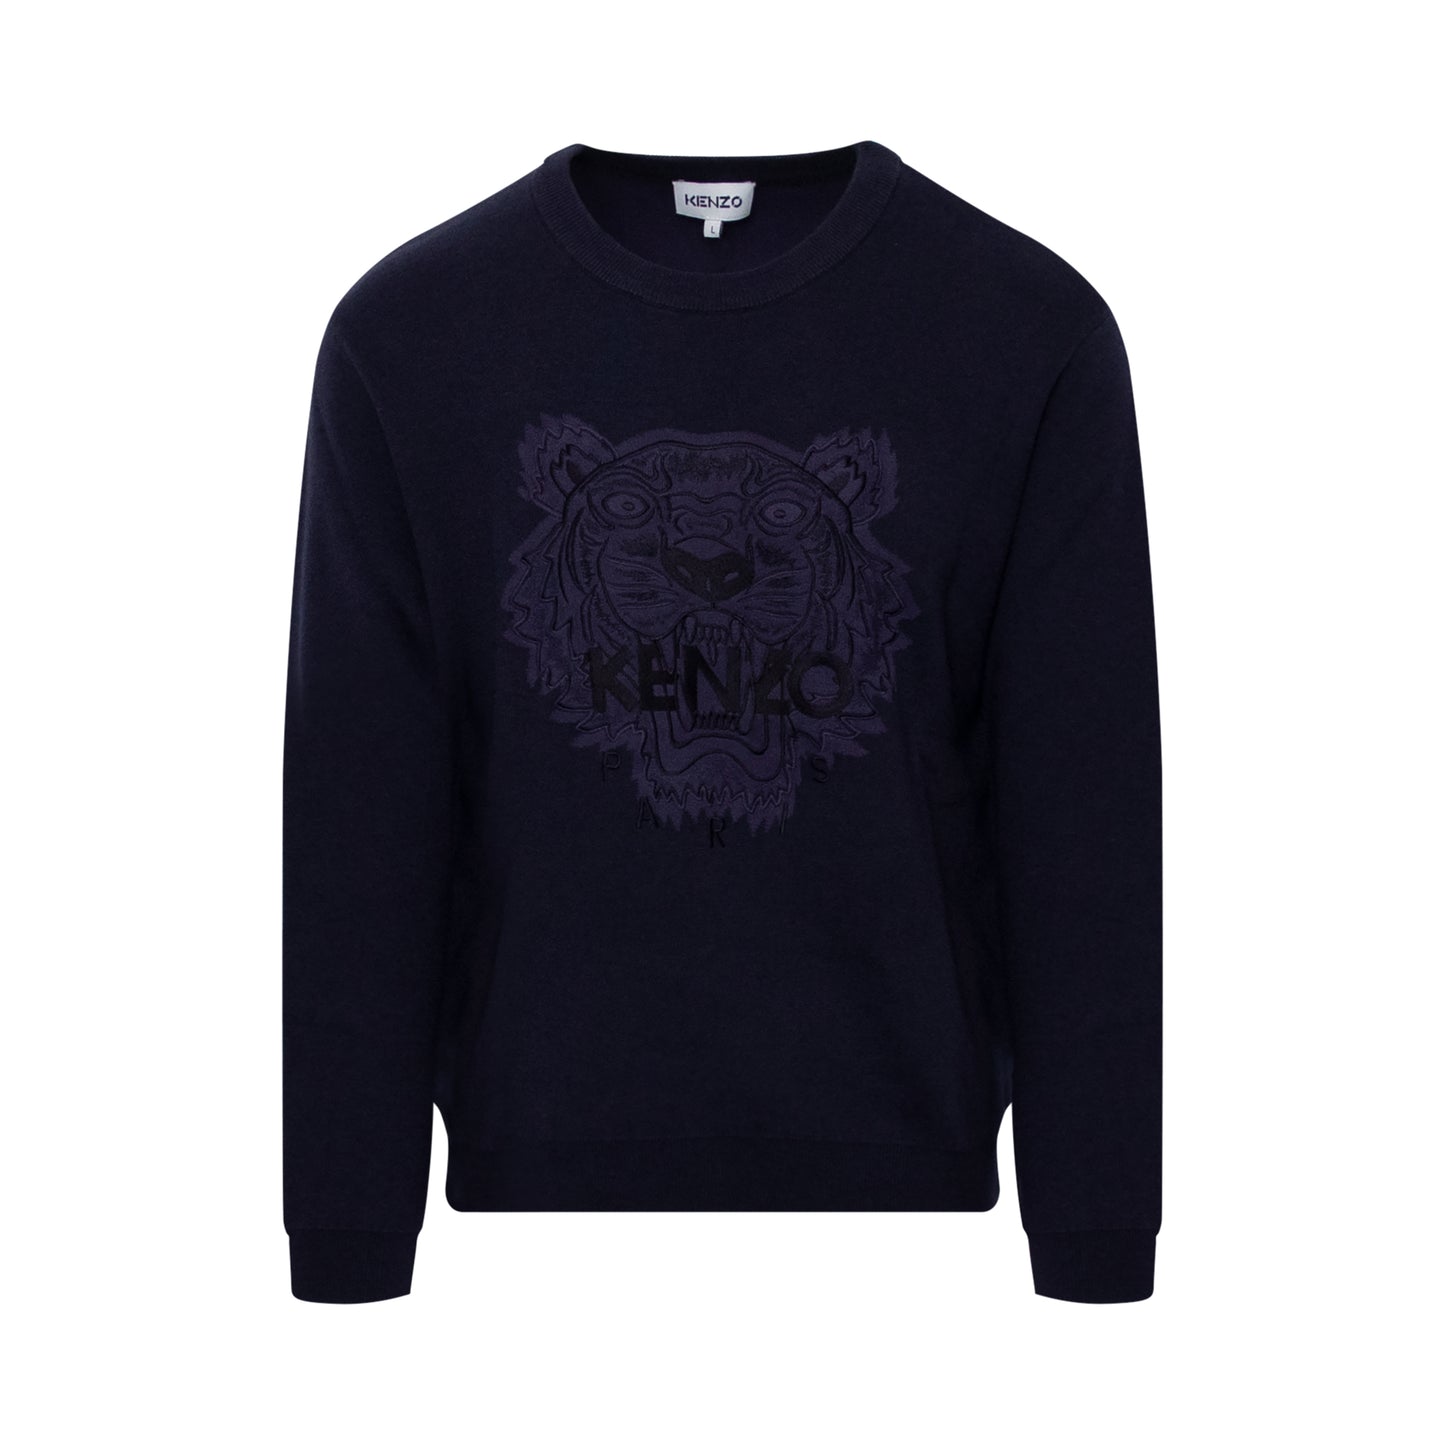 Kenzo Classic Tiger Jumper in Navy Blue